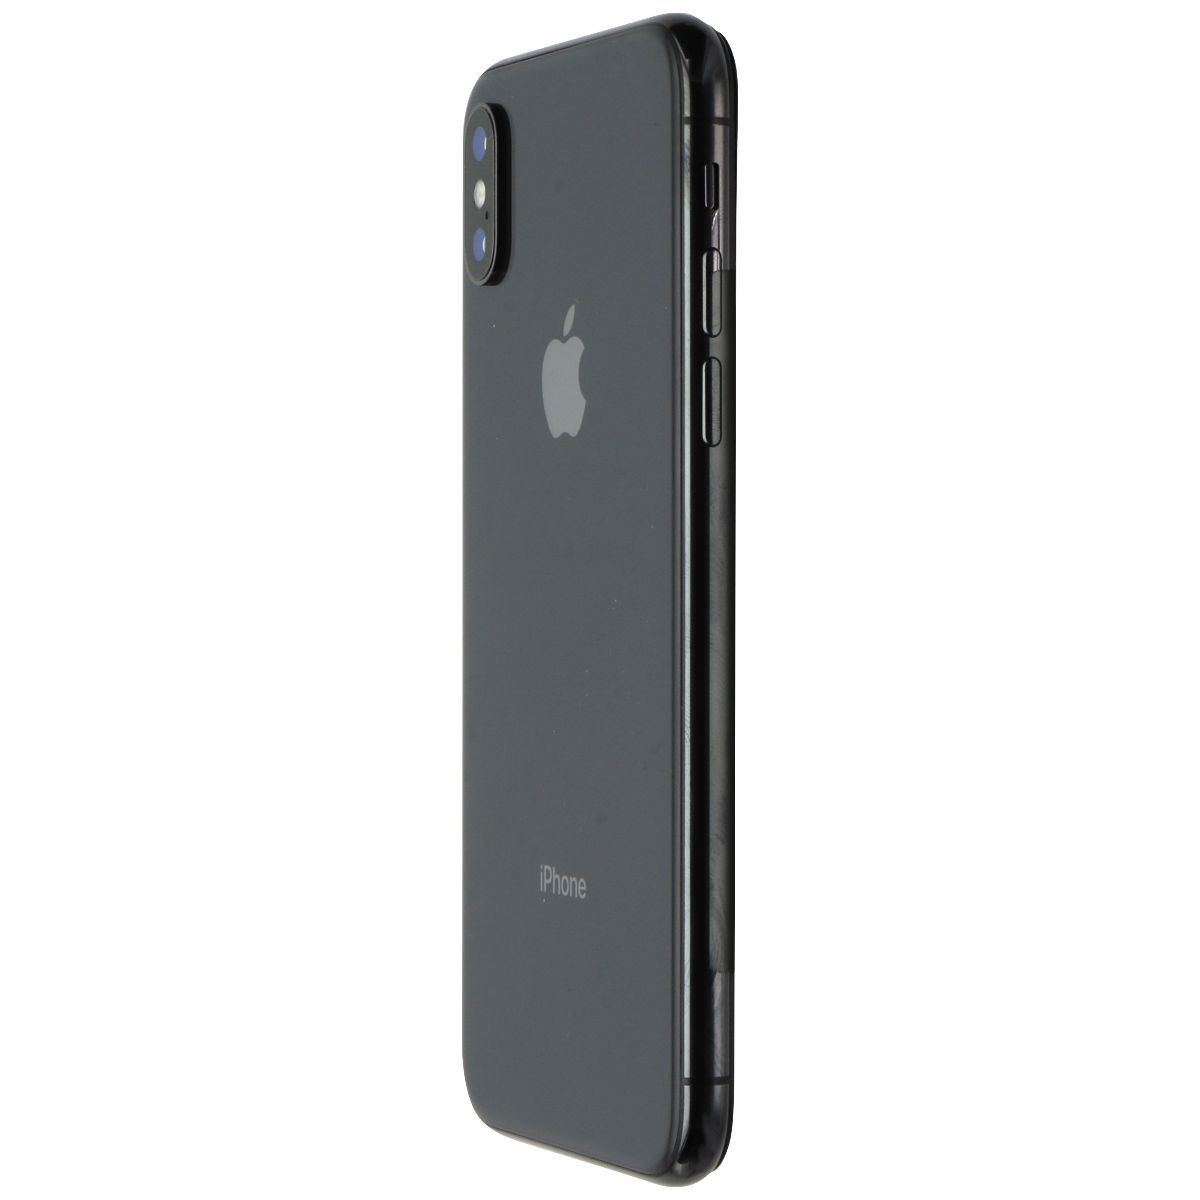 Apple iPhone X (5.8-inch) Smartphone (A1902) Unlocked - 256GB / Space Gray Cell Phones & Smartphones Apple    - Simple Cell Bulk Wholesale Pricing - USA Seller